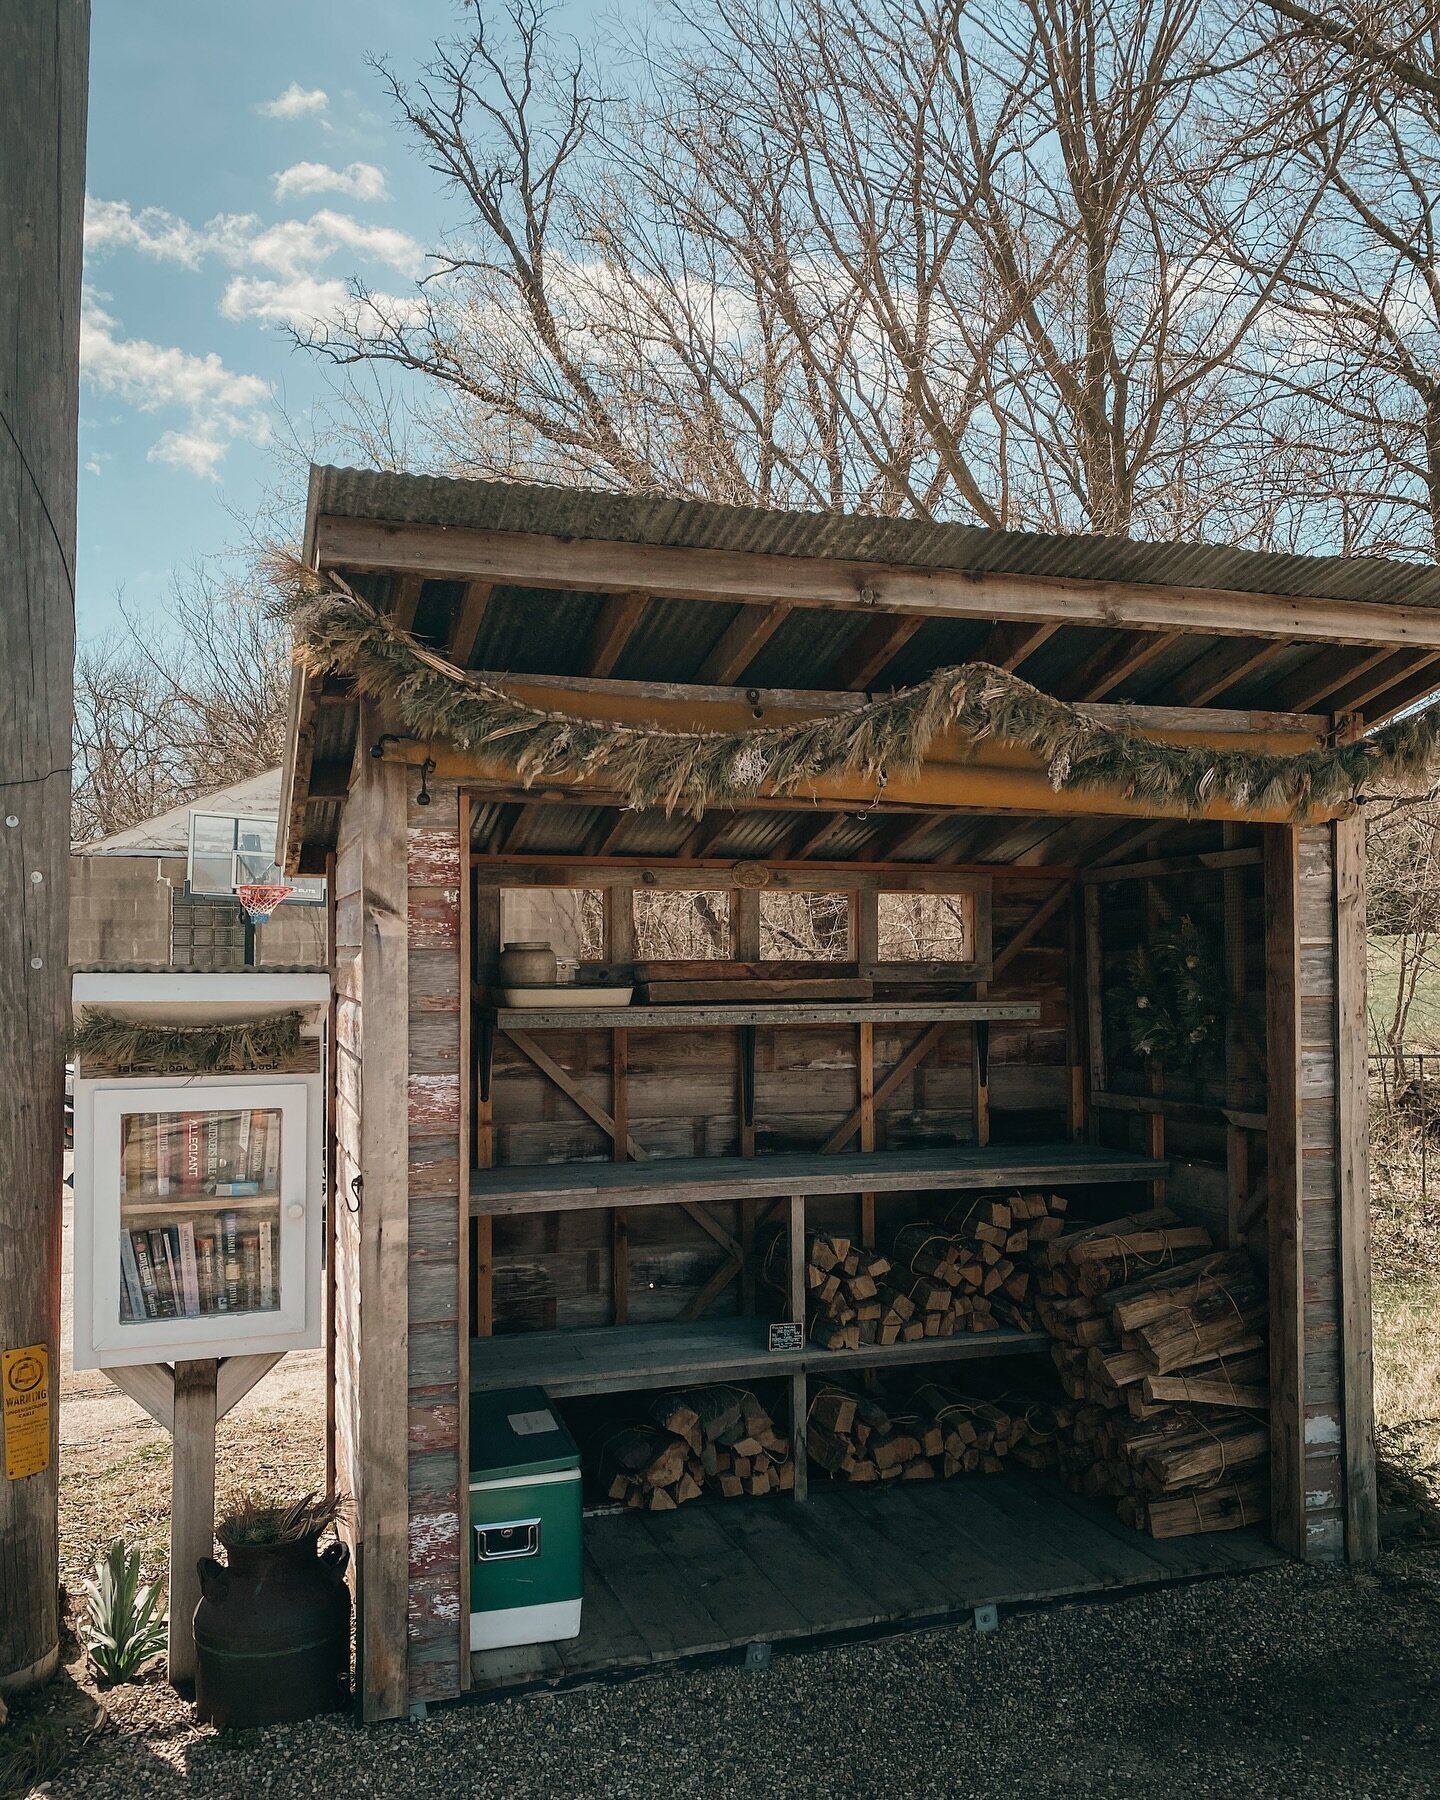 ✨ Hip hip hooray! Our farm stand opens soon!✨ 

We&rsquo;re thrilled to say that our farm stand will officially open for the season on Friday, April 12th! We&rsquo;re so excited to see you all again and share the abundance of the seasons with you. 

